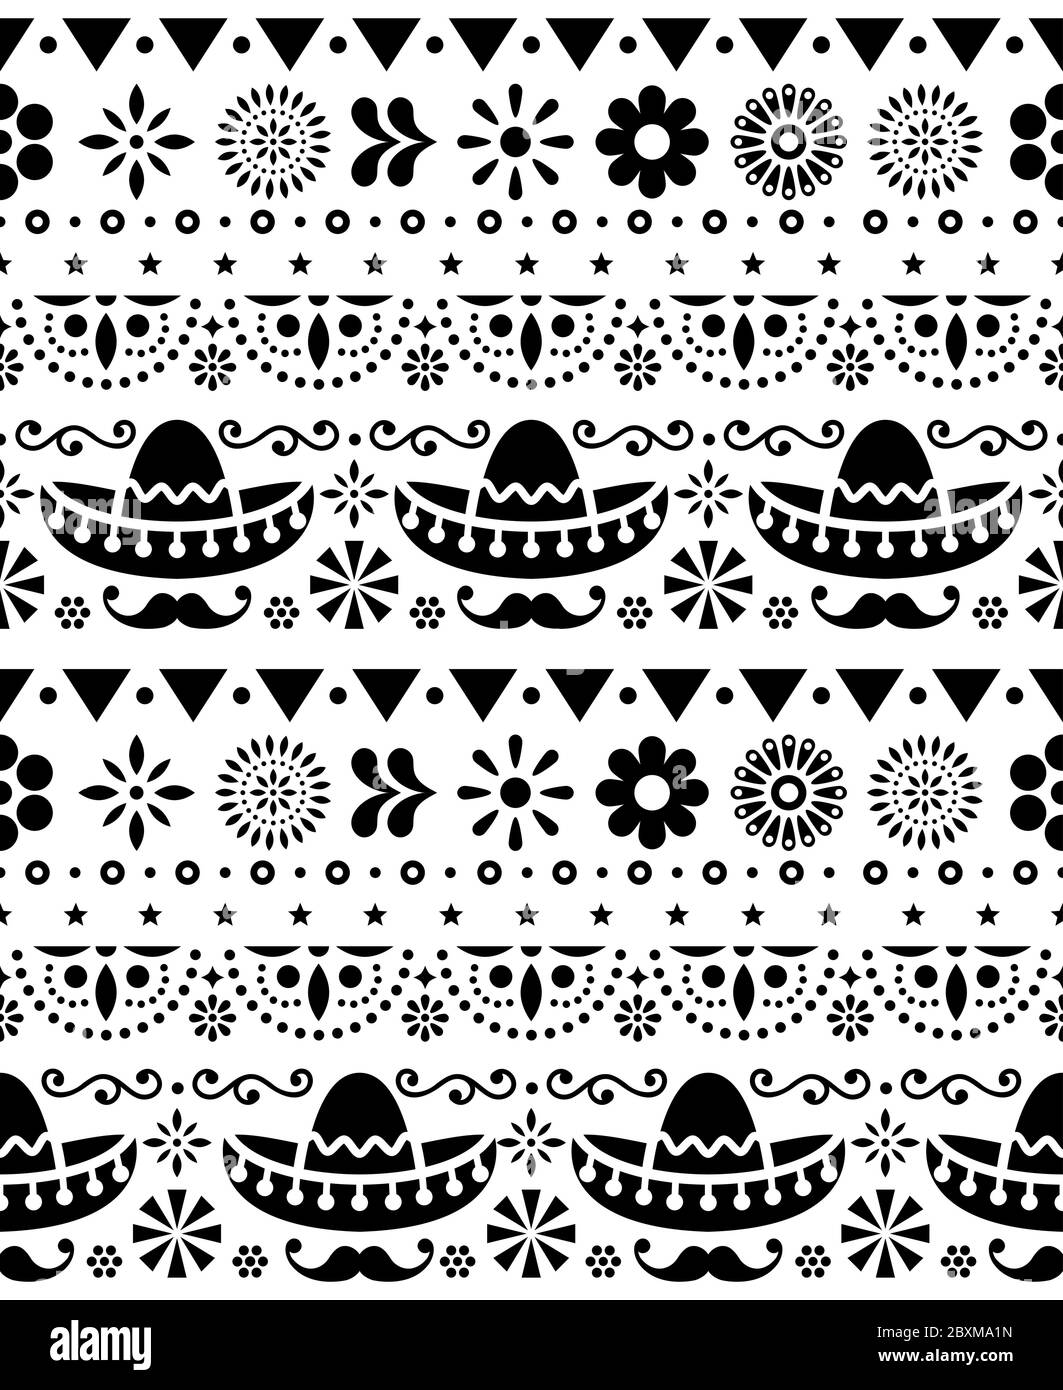 Mexican hat - sombrero and long mustache seamless vector floral pattern - textile, wallpaper design Stock Vector